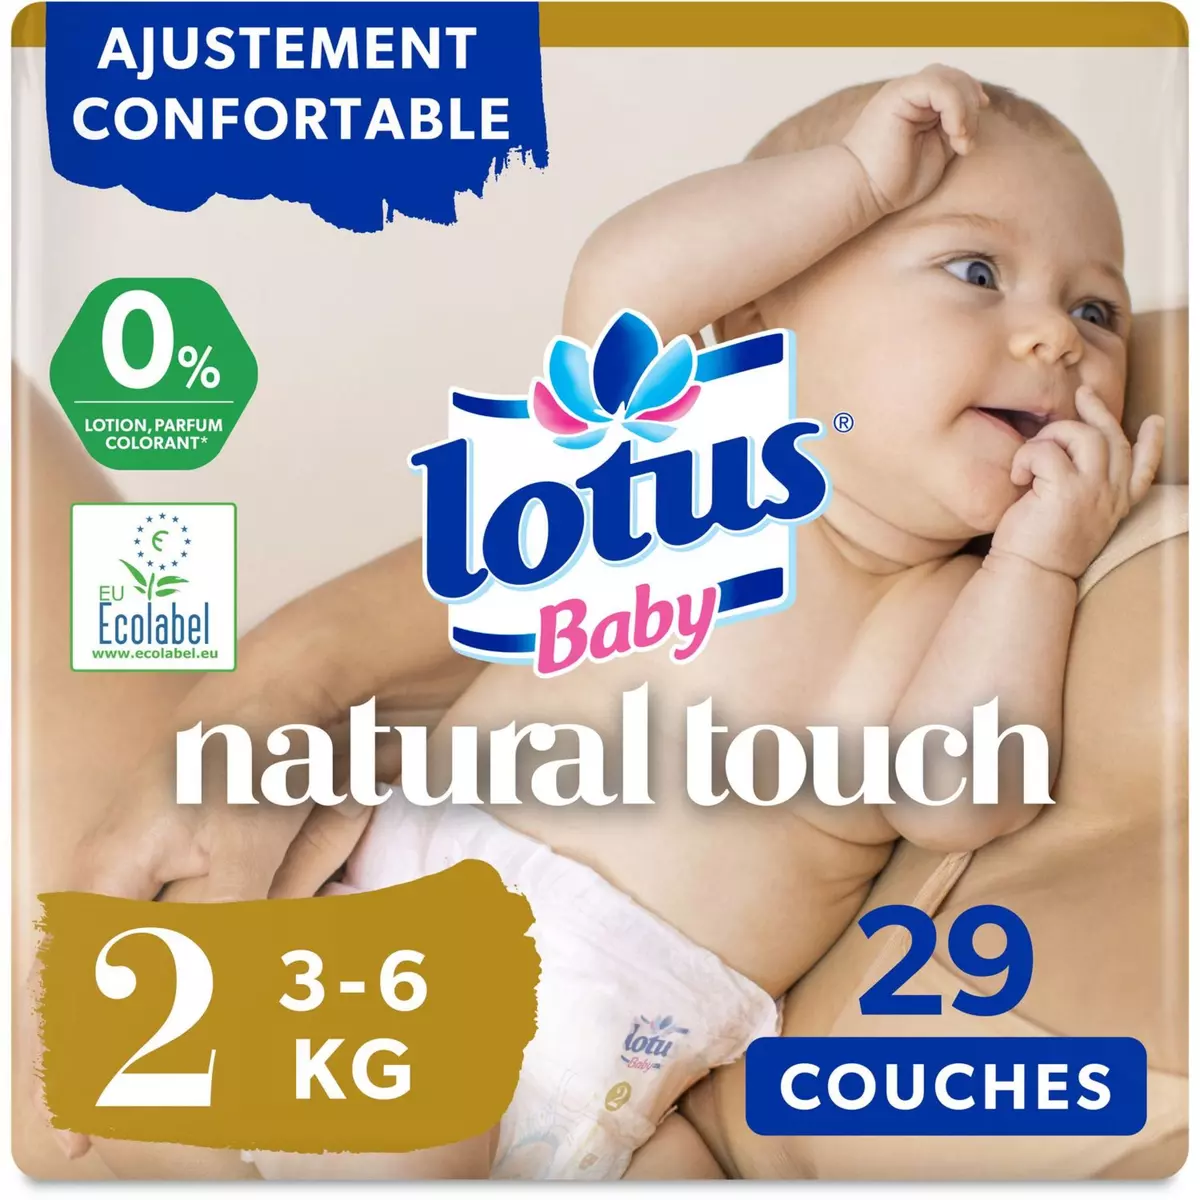 Baby Lotus - Couches taille 3 - Supermarchés Match